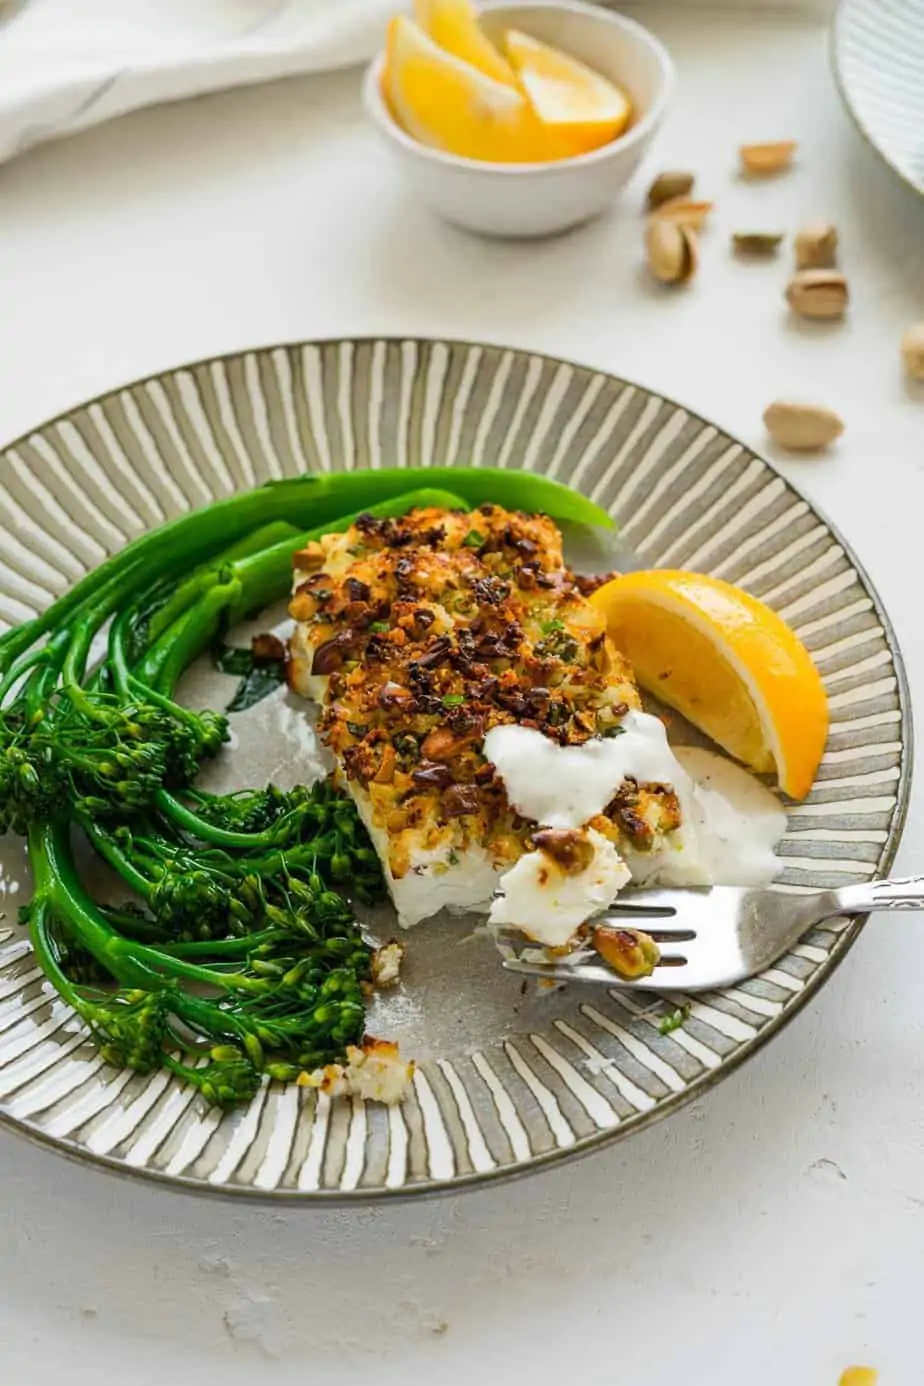 Perfectly cooked fish serve with a side of broccolini and lemon wedges.